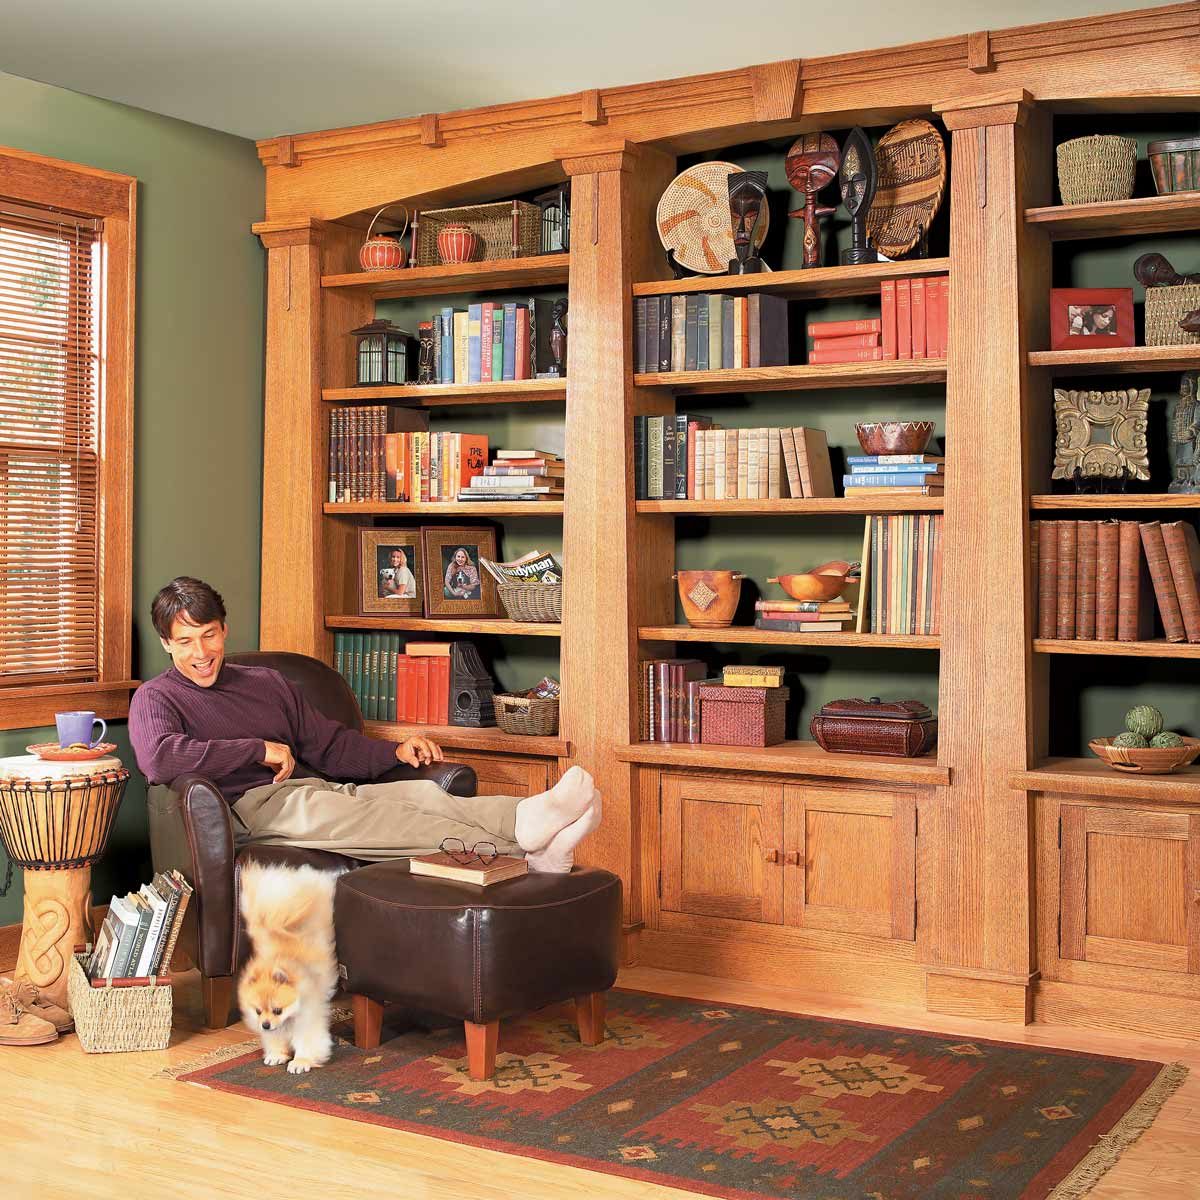 List 99+ Images photos of built in bookcases Completed